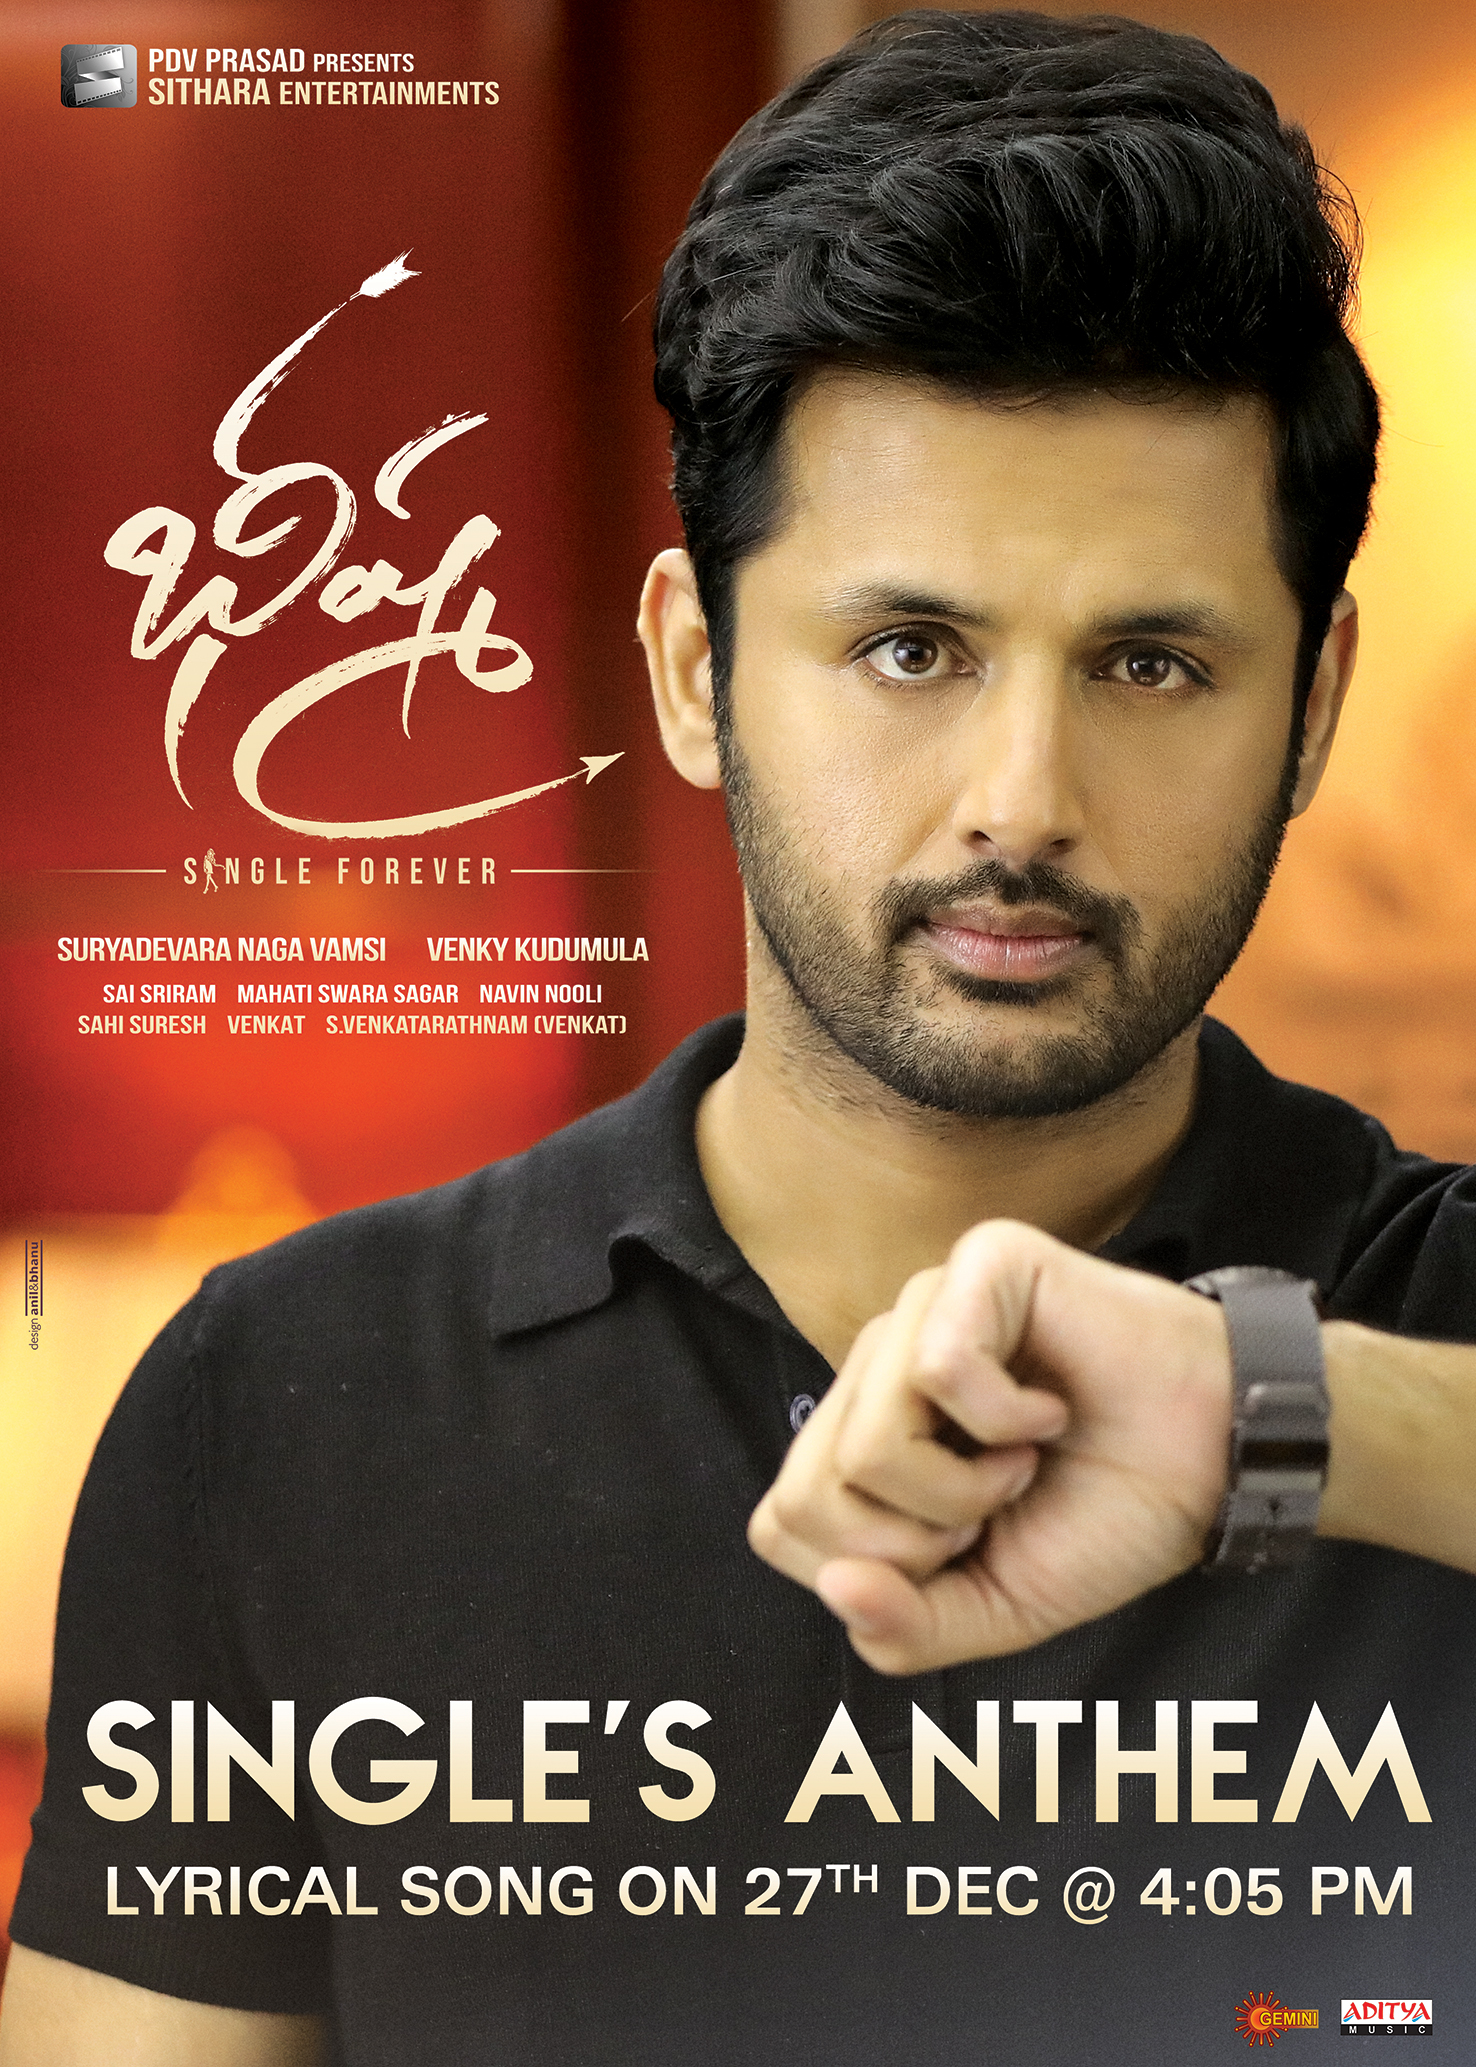 Bheeshma Singles Anthem song released